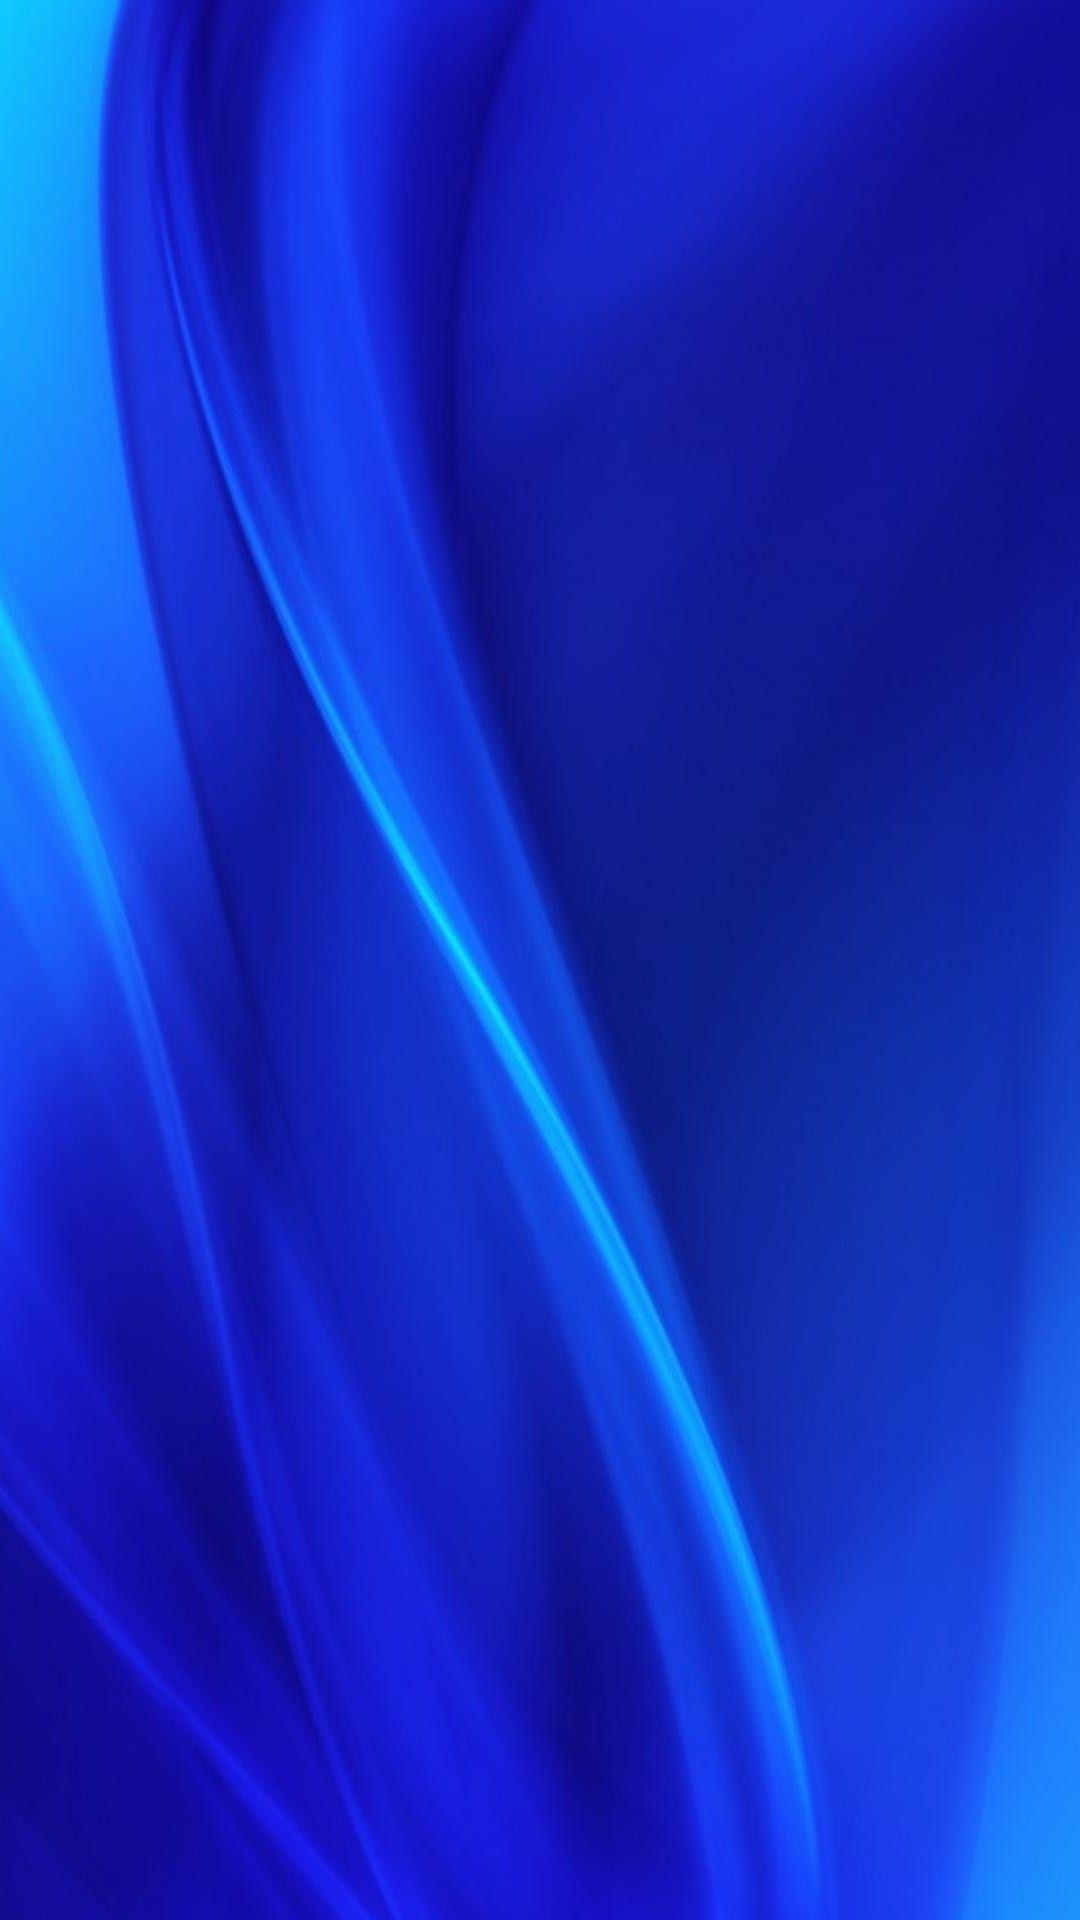  Blue  Android  Wallpapers  HD Wallpaper  Cave